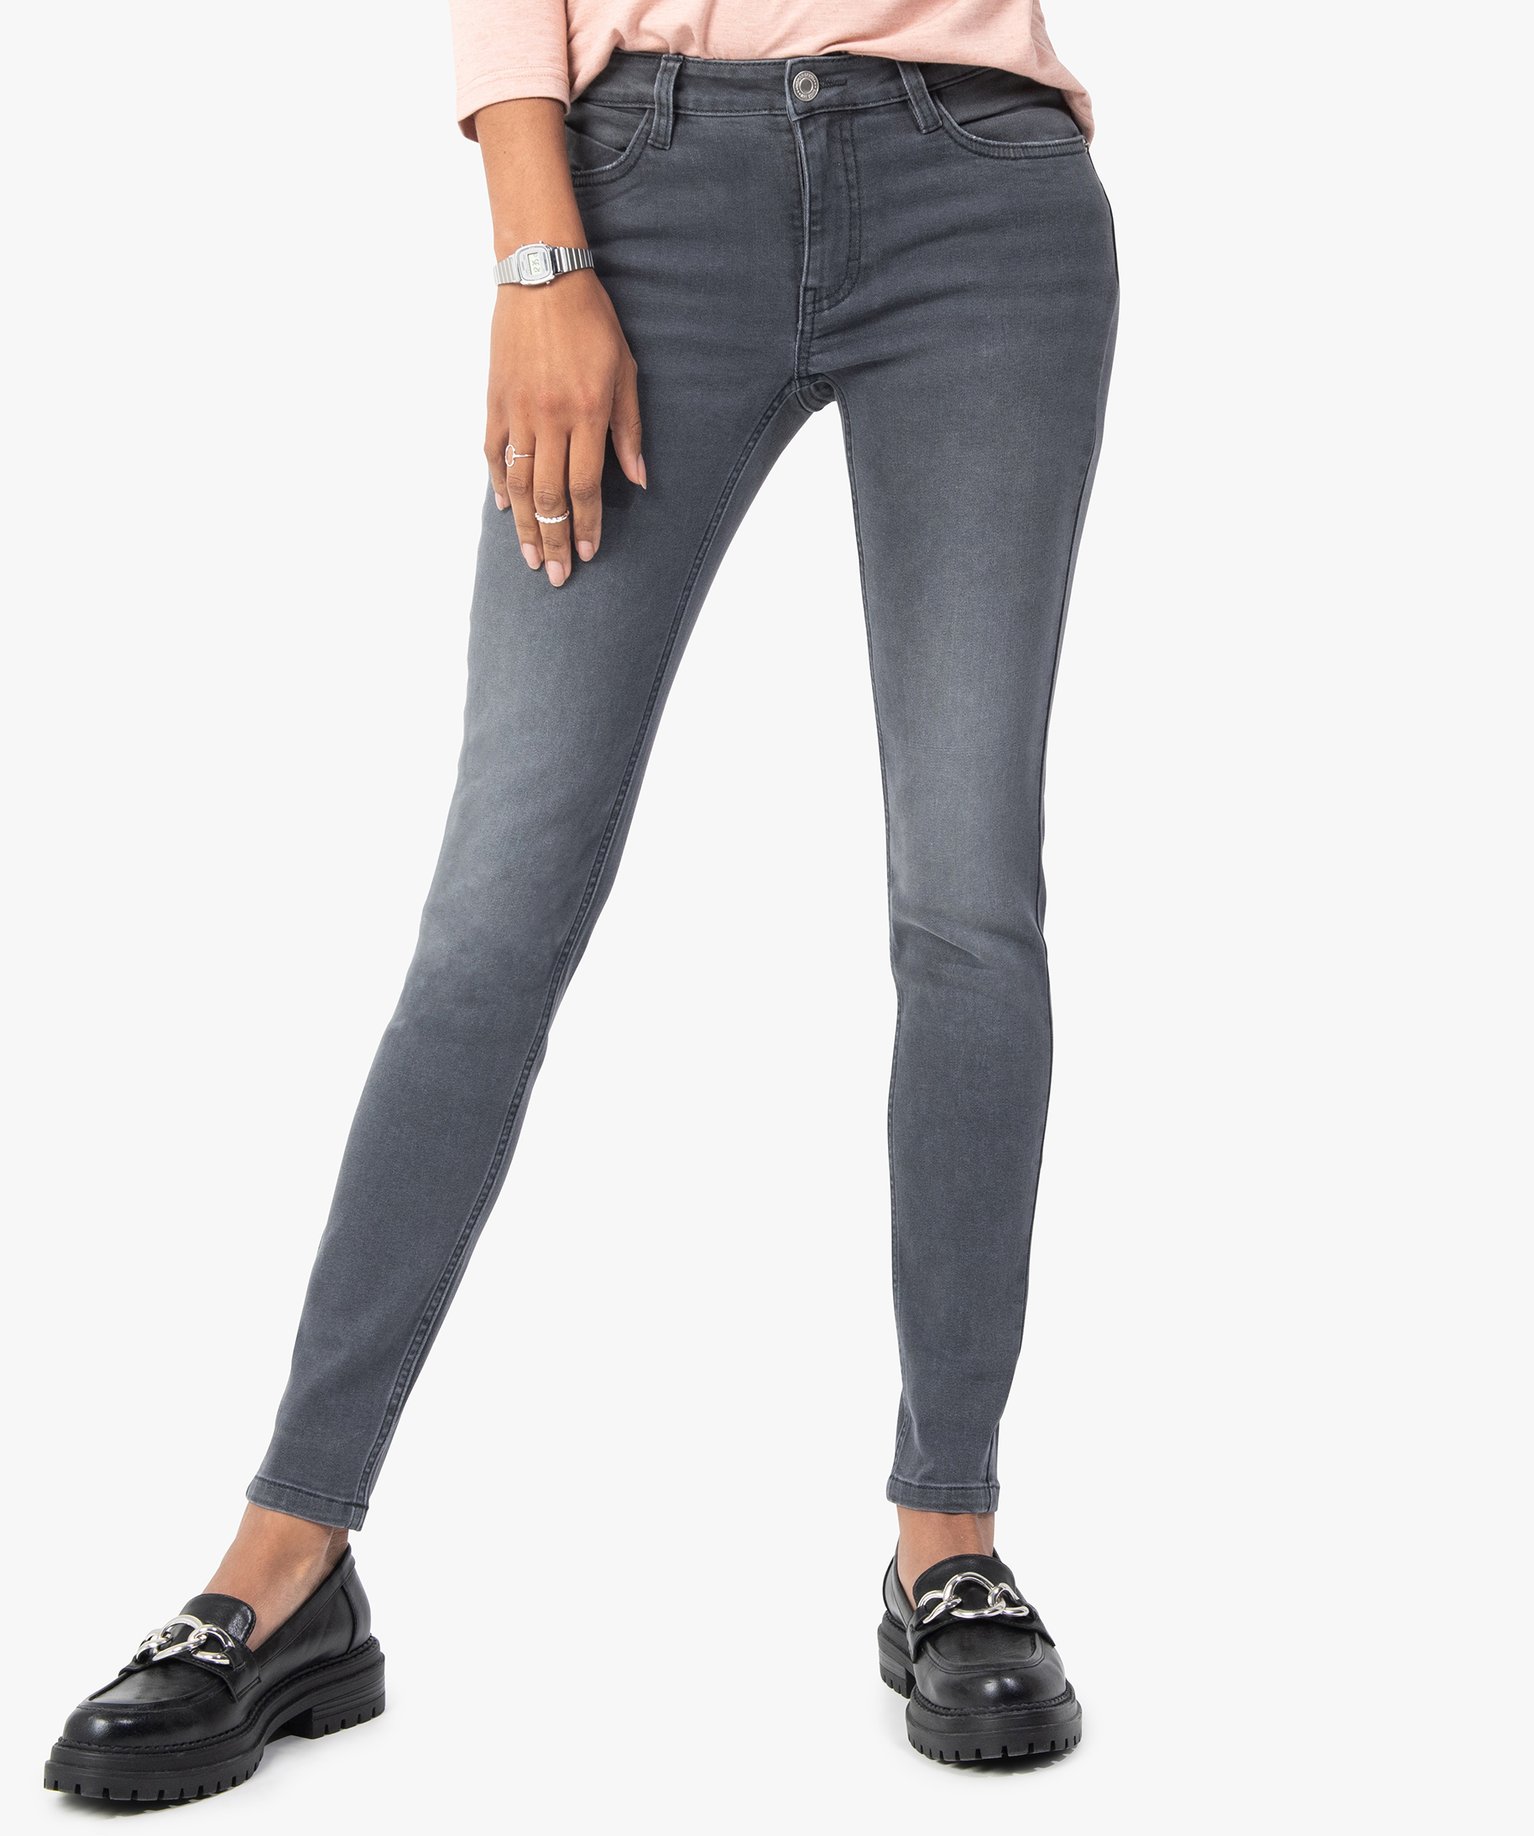 jean femme coupe skinny taille normale delave gris